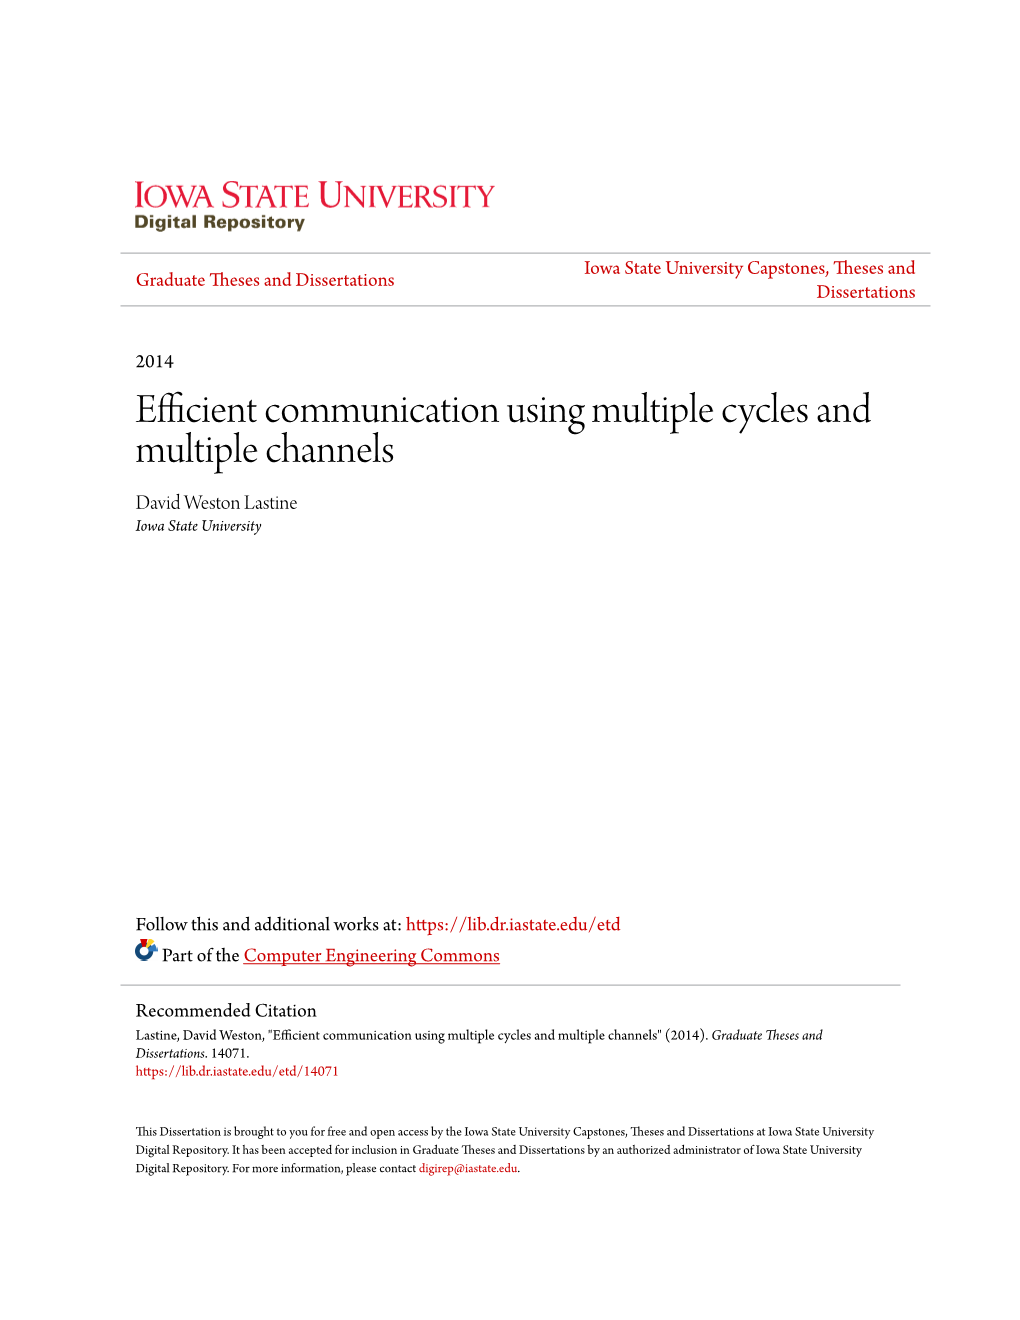 Efficient Communication Using Multiple Cycles and Multiple Channels David Weston Lastine Iowa State University